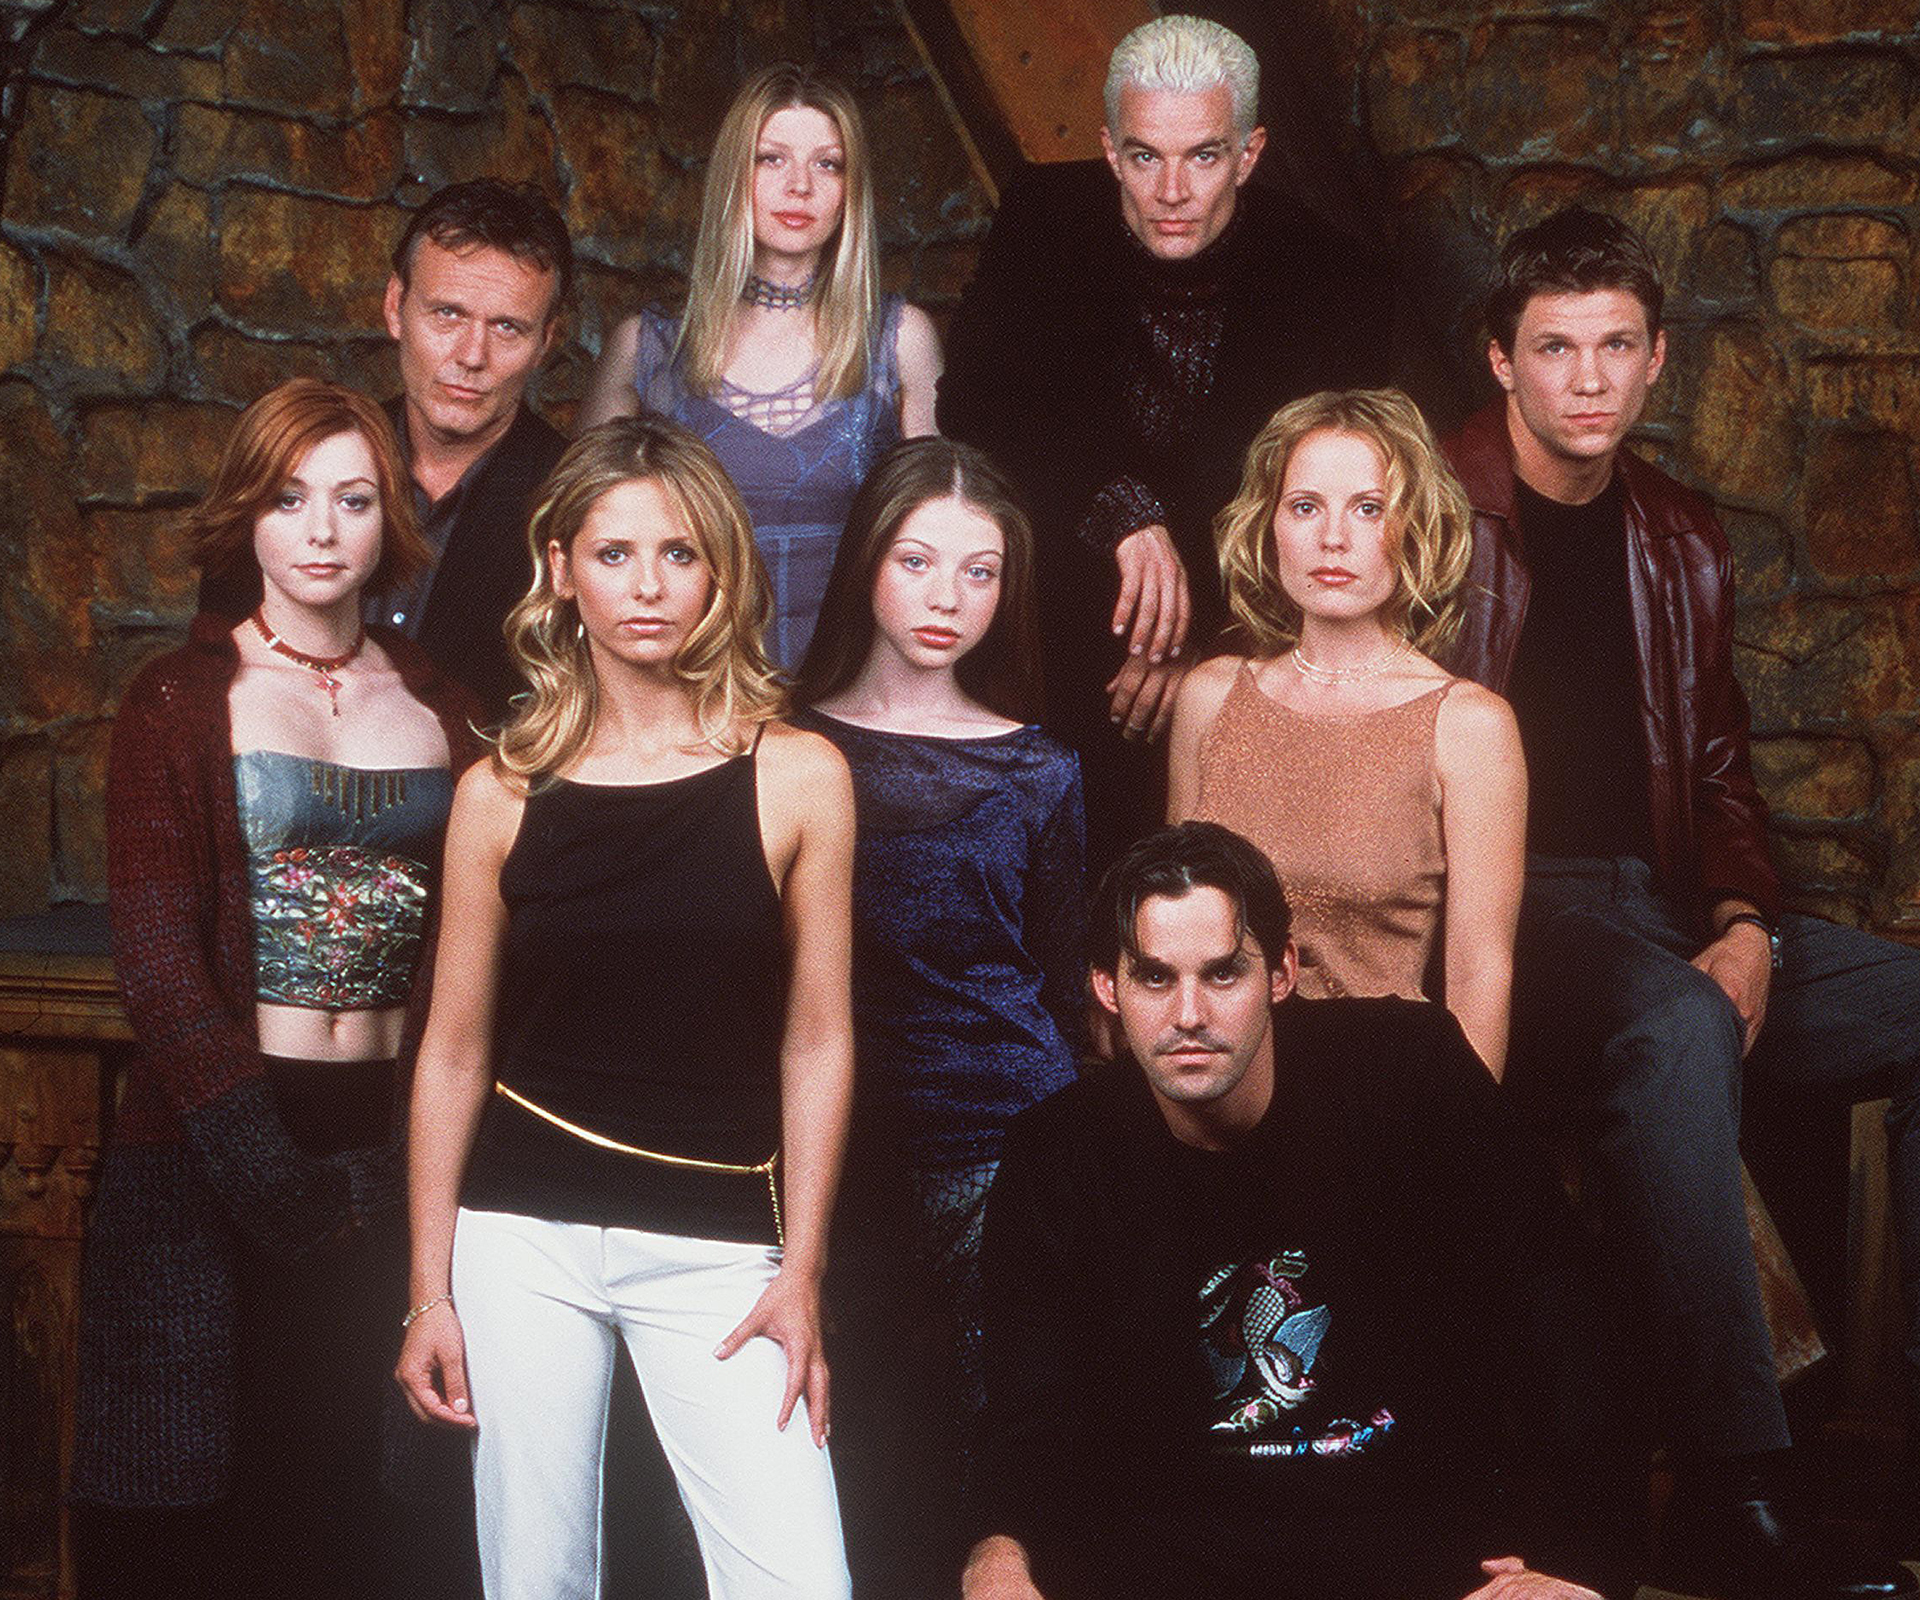 The cast of Buffy.